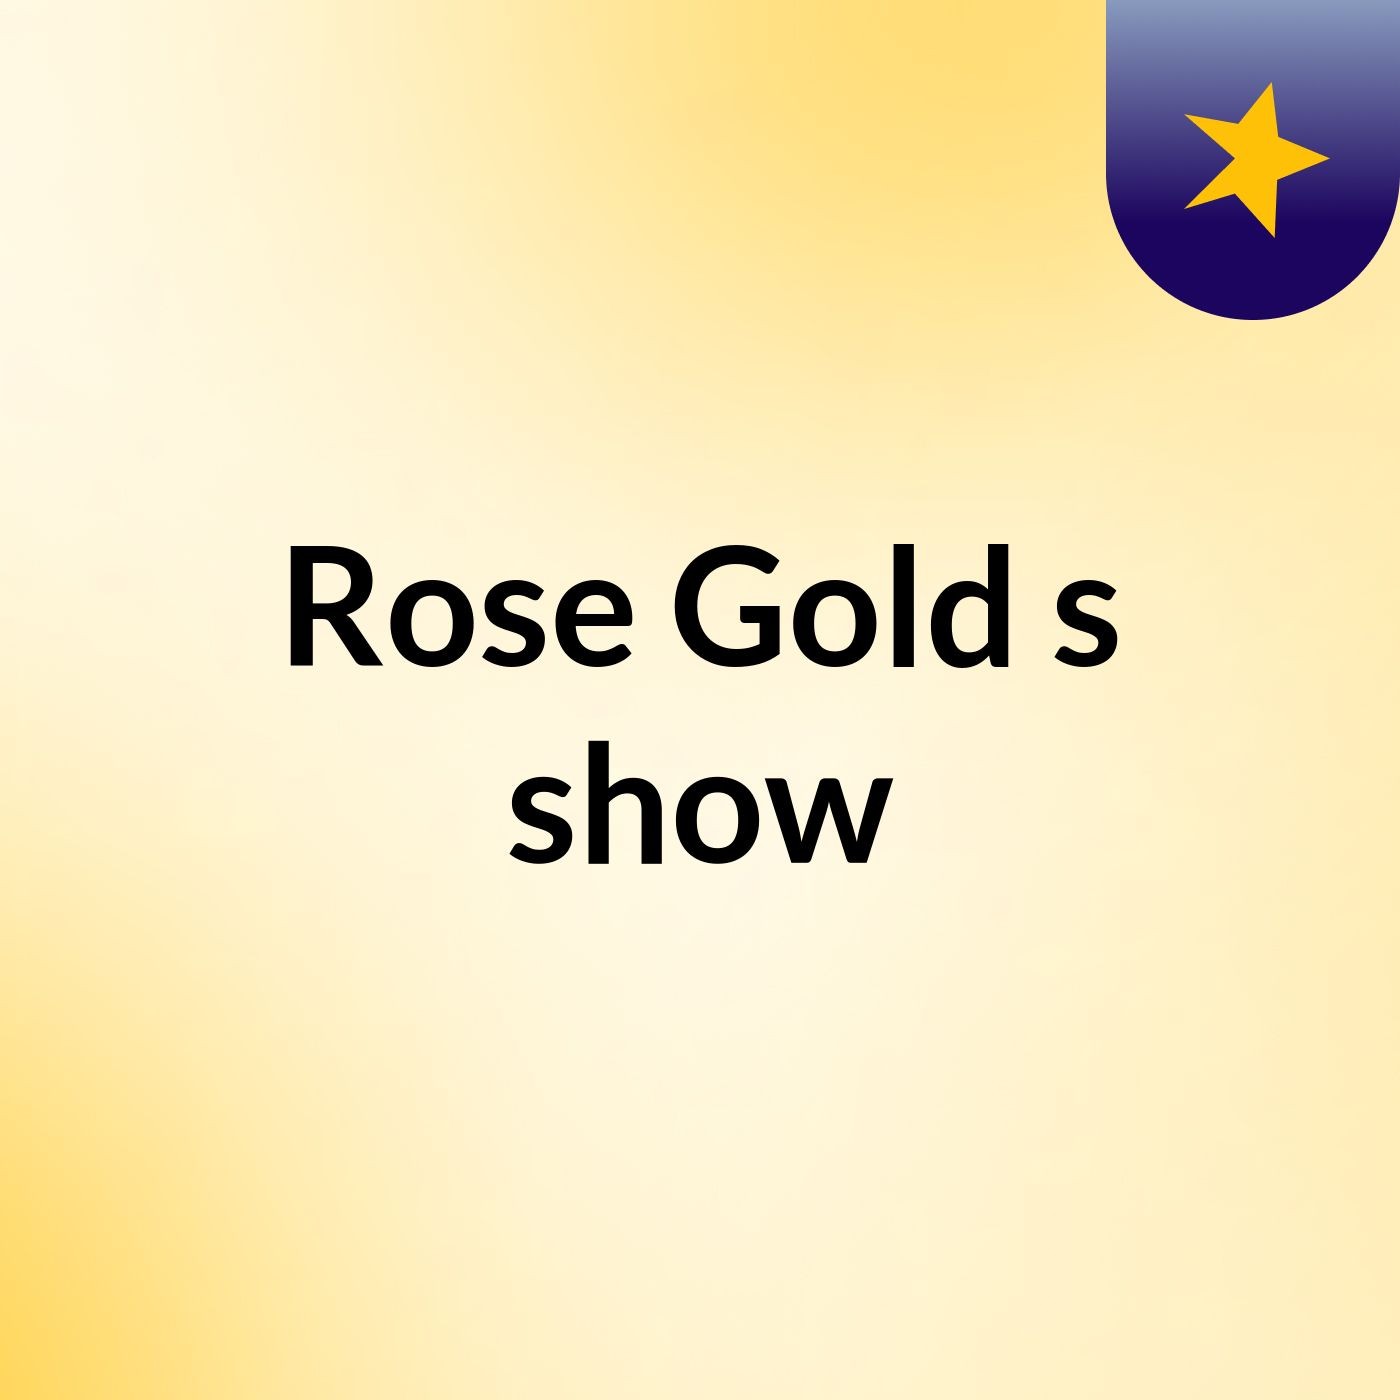 Rose Gold's show